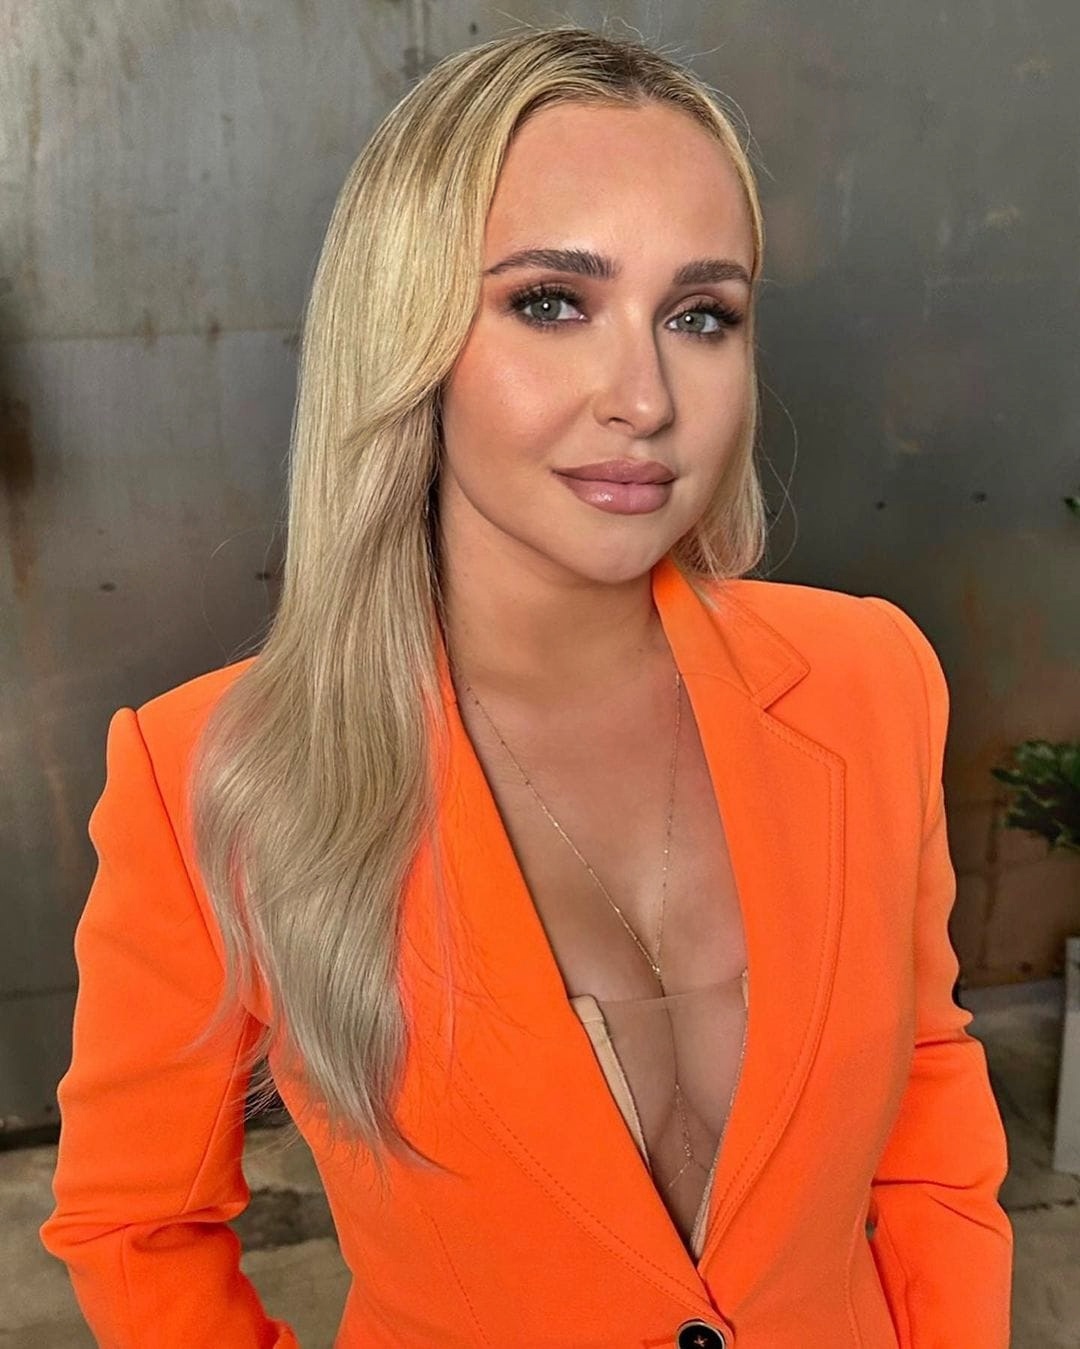 Photos n°2 : Orange You Glad to See Hayden Panettiere in The New SCREAM Trailer!